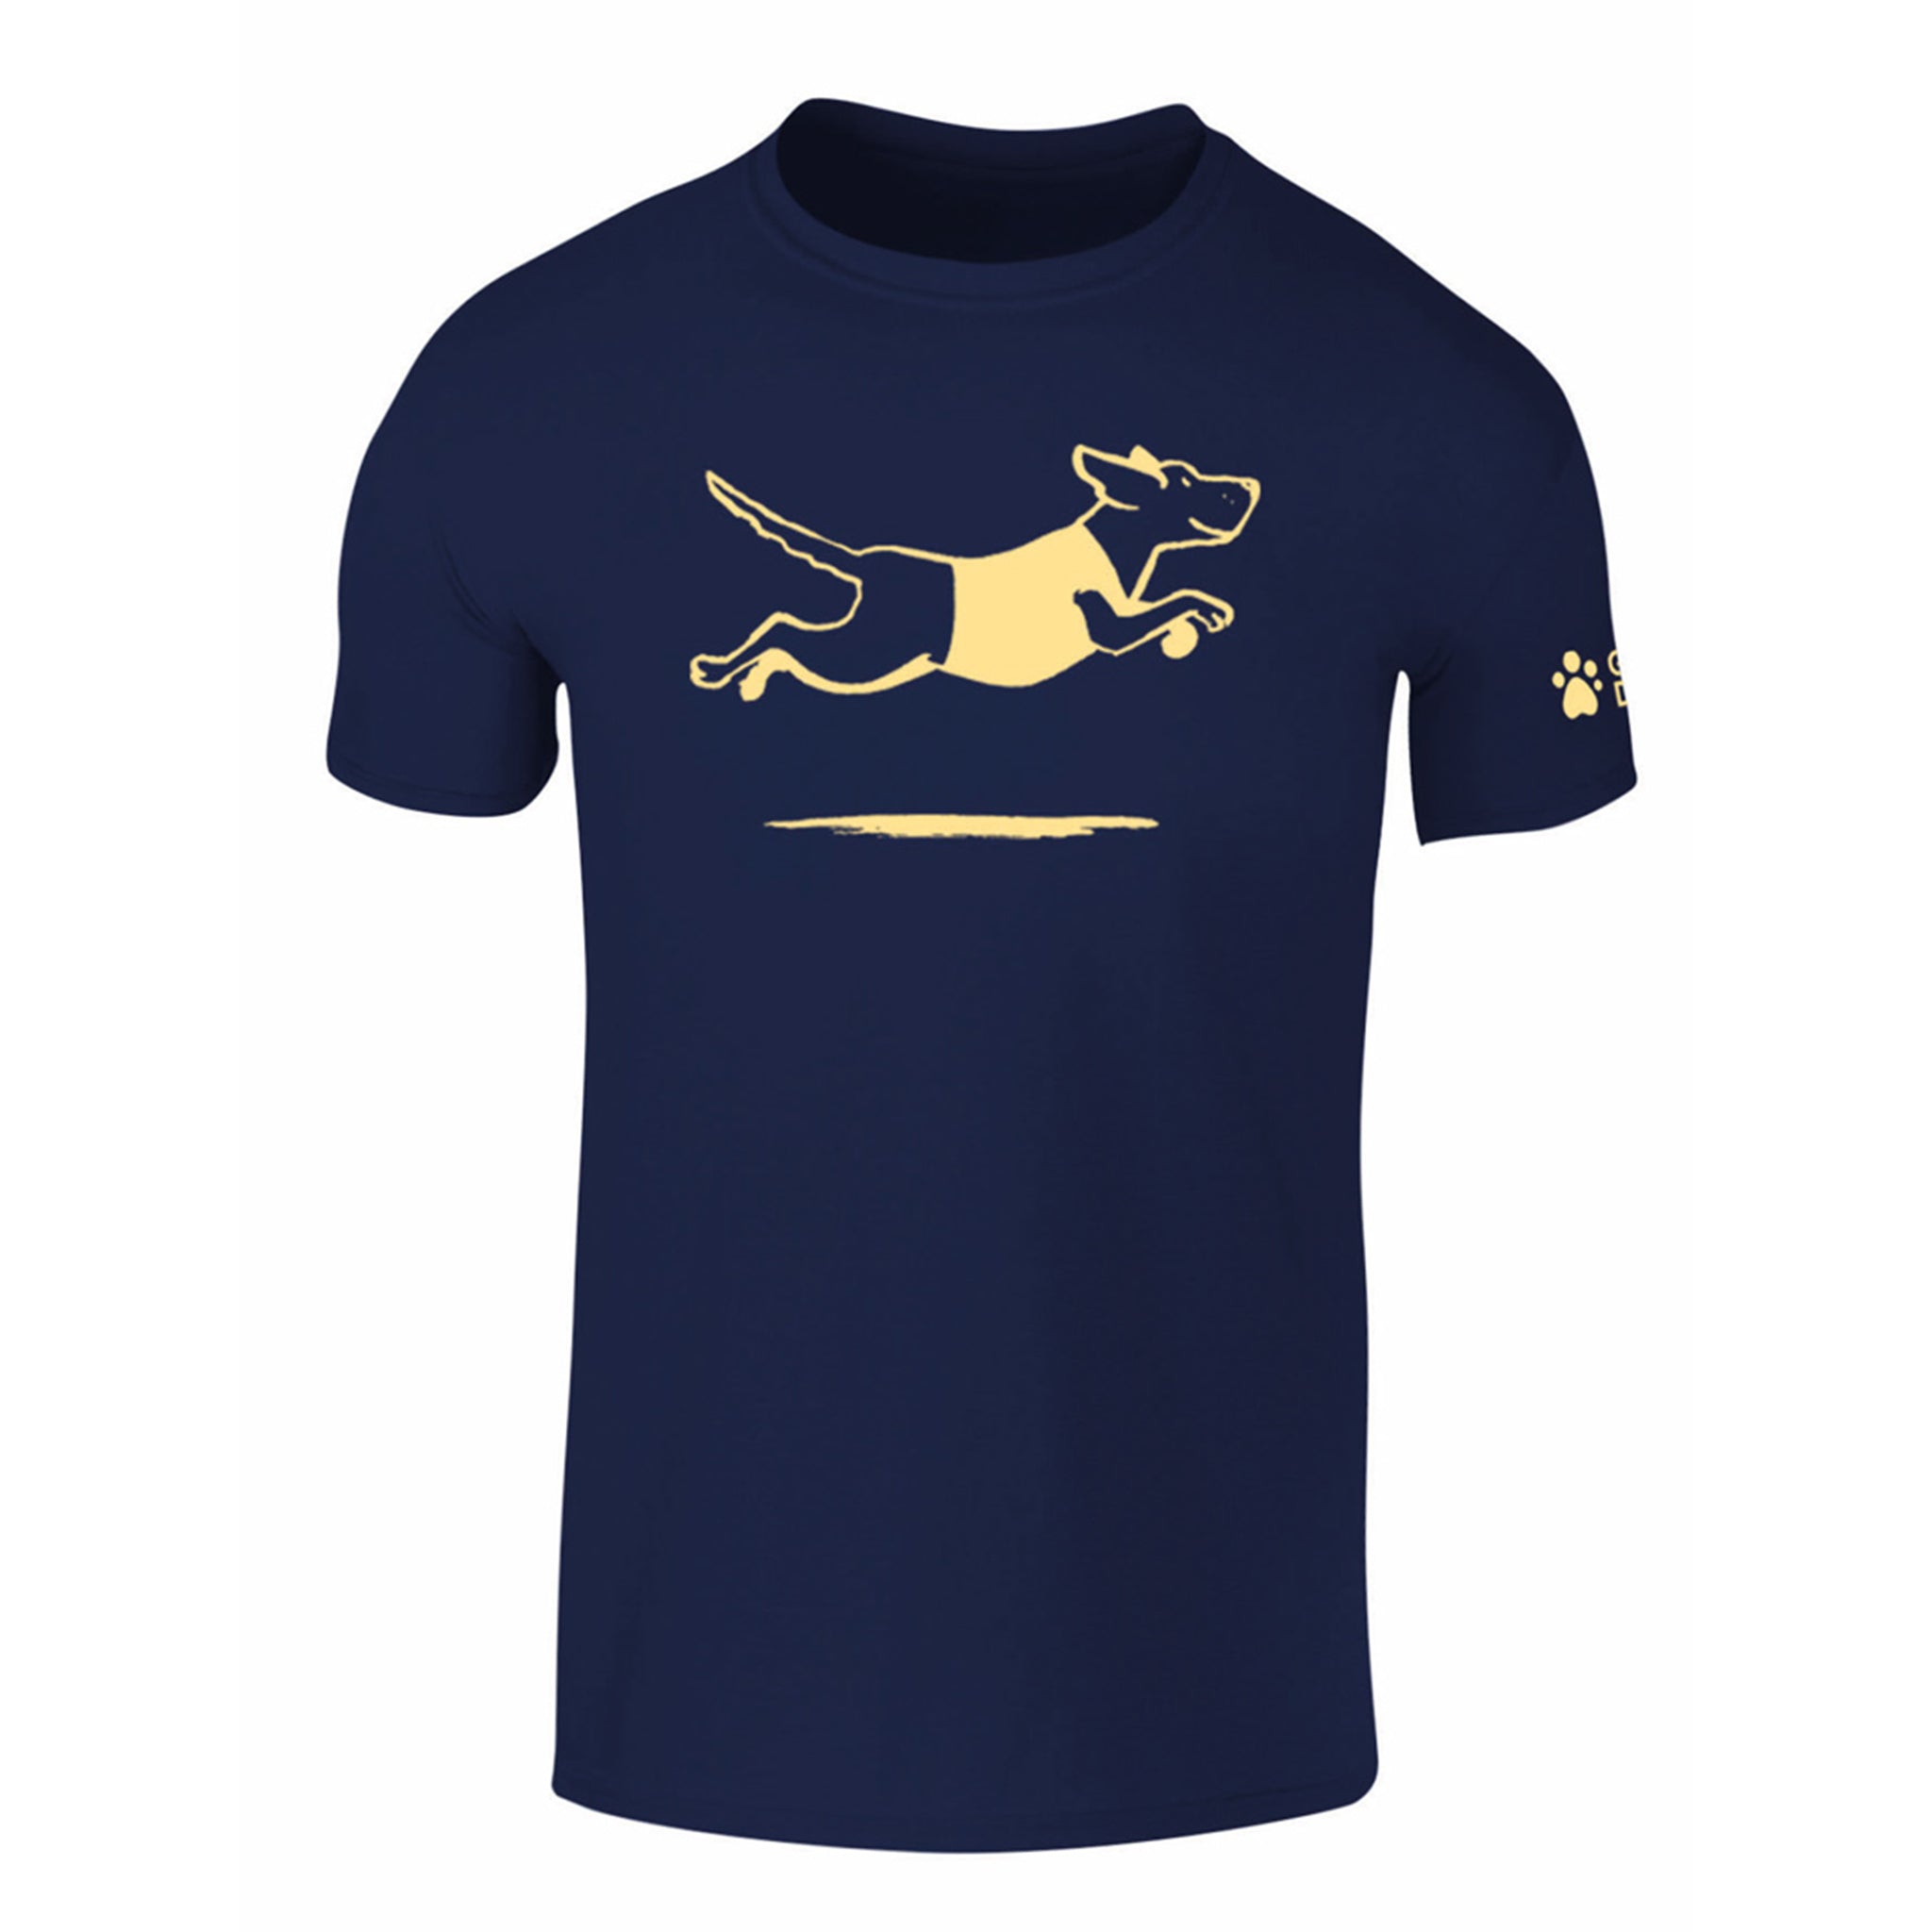 A close up of the front of a navy blue women's t-shirt, there is leaping Labrador design printed on the front in yellow and the Guide Dogs logo is printed on the left sleeve.